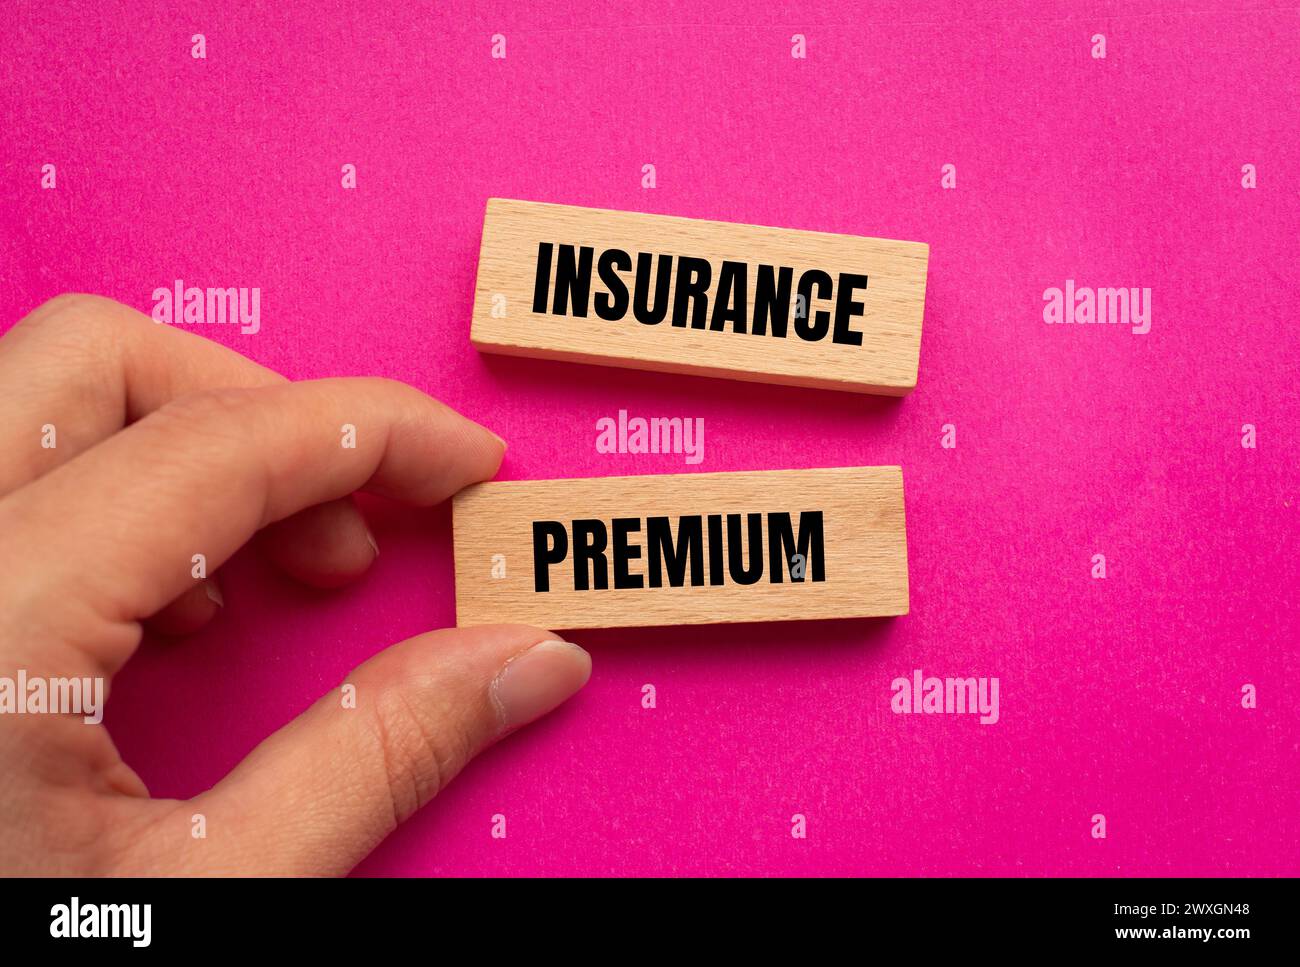 Insurance premium words written on wooden blocks with pink background. Conceptual symbol. Copy space. Stock Photo